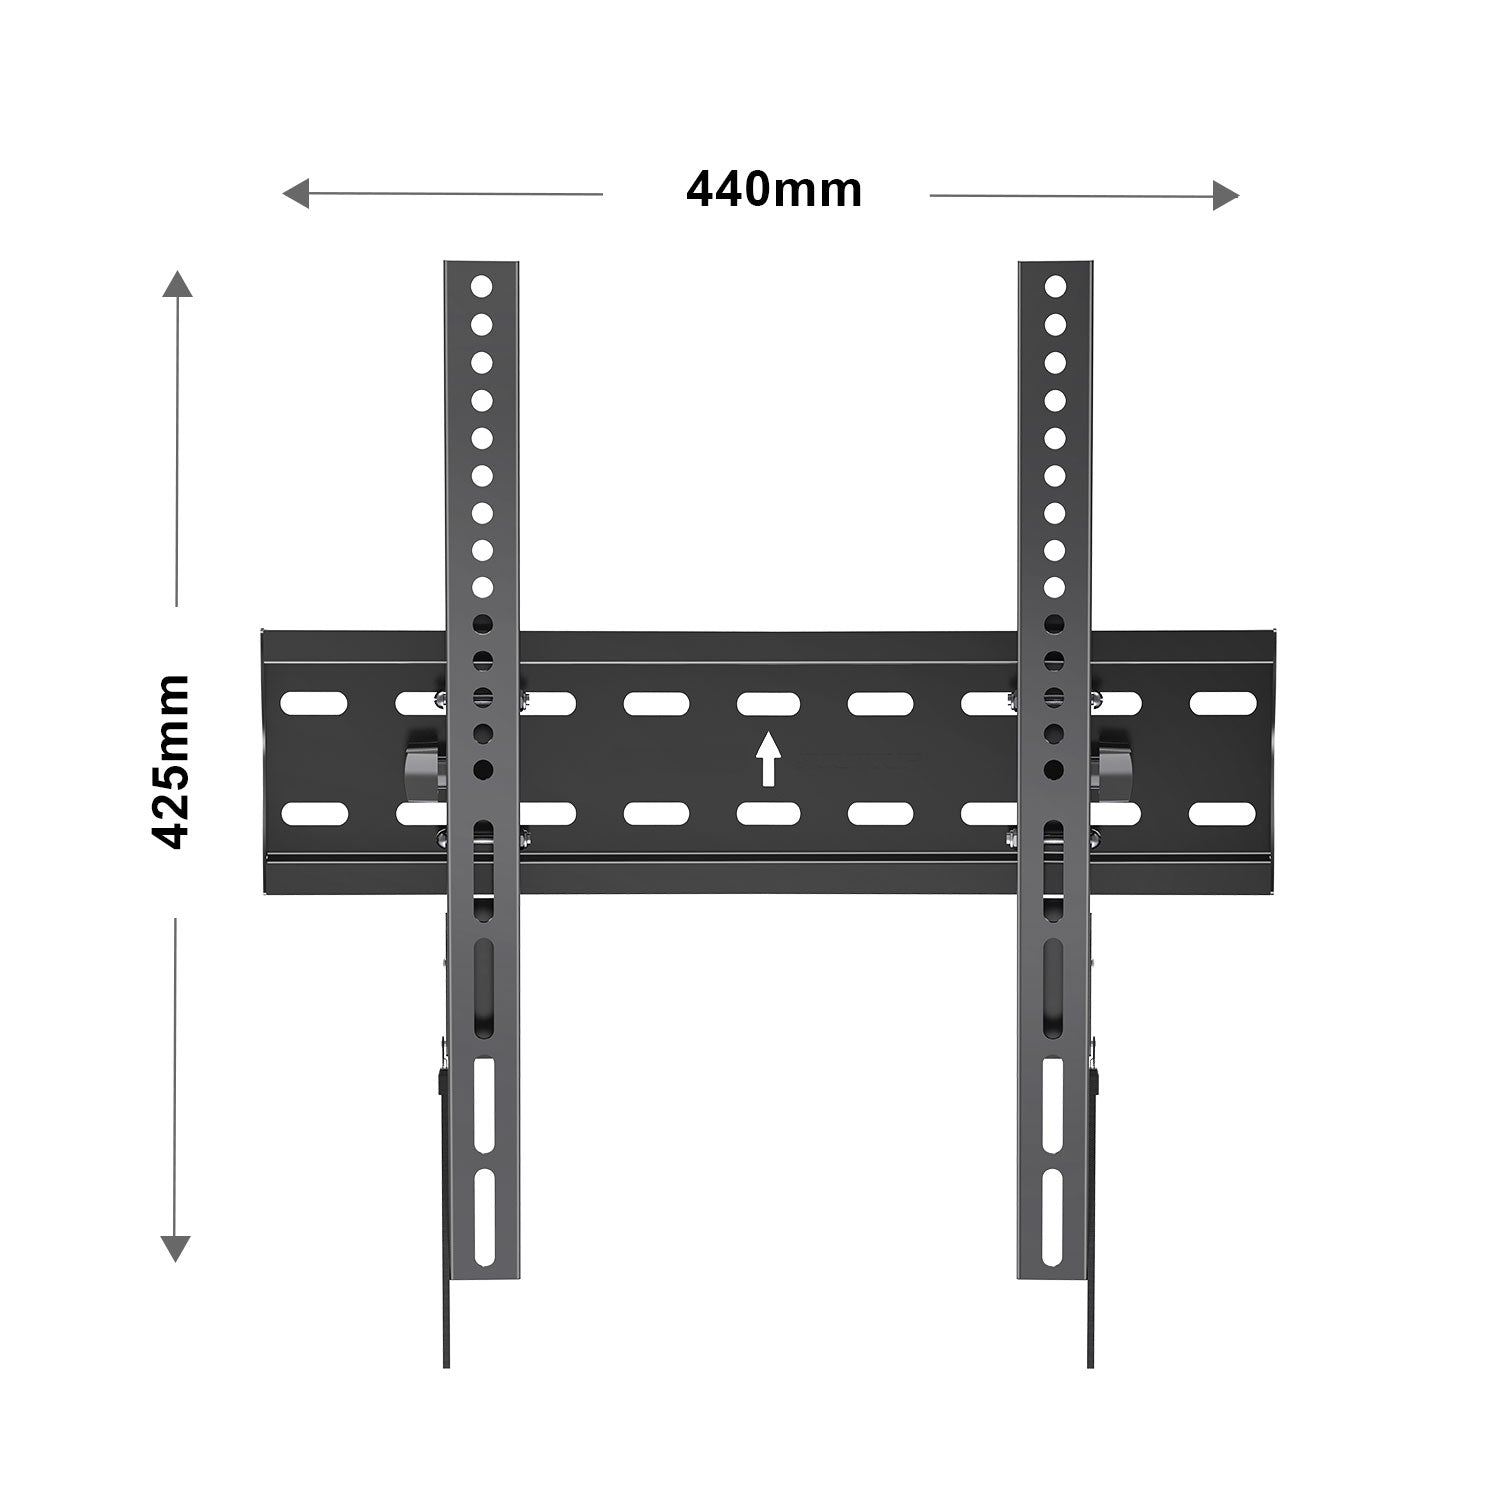 tilting TV wall mount specifications